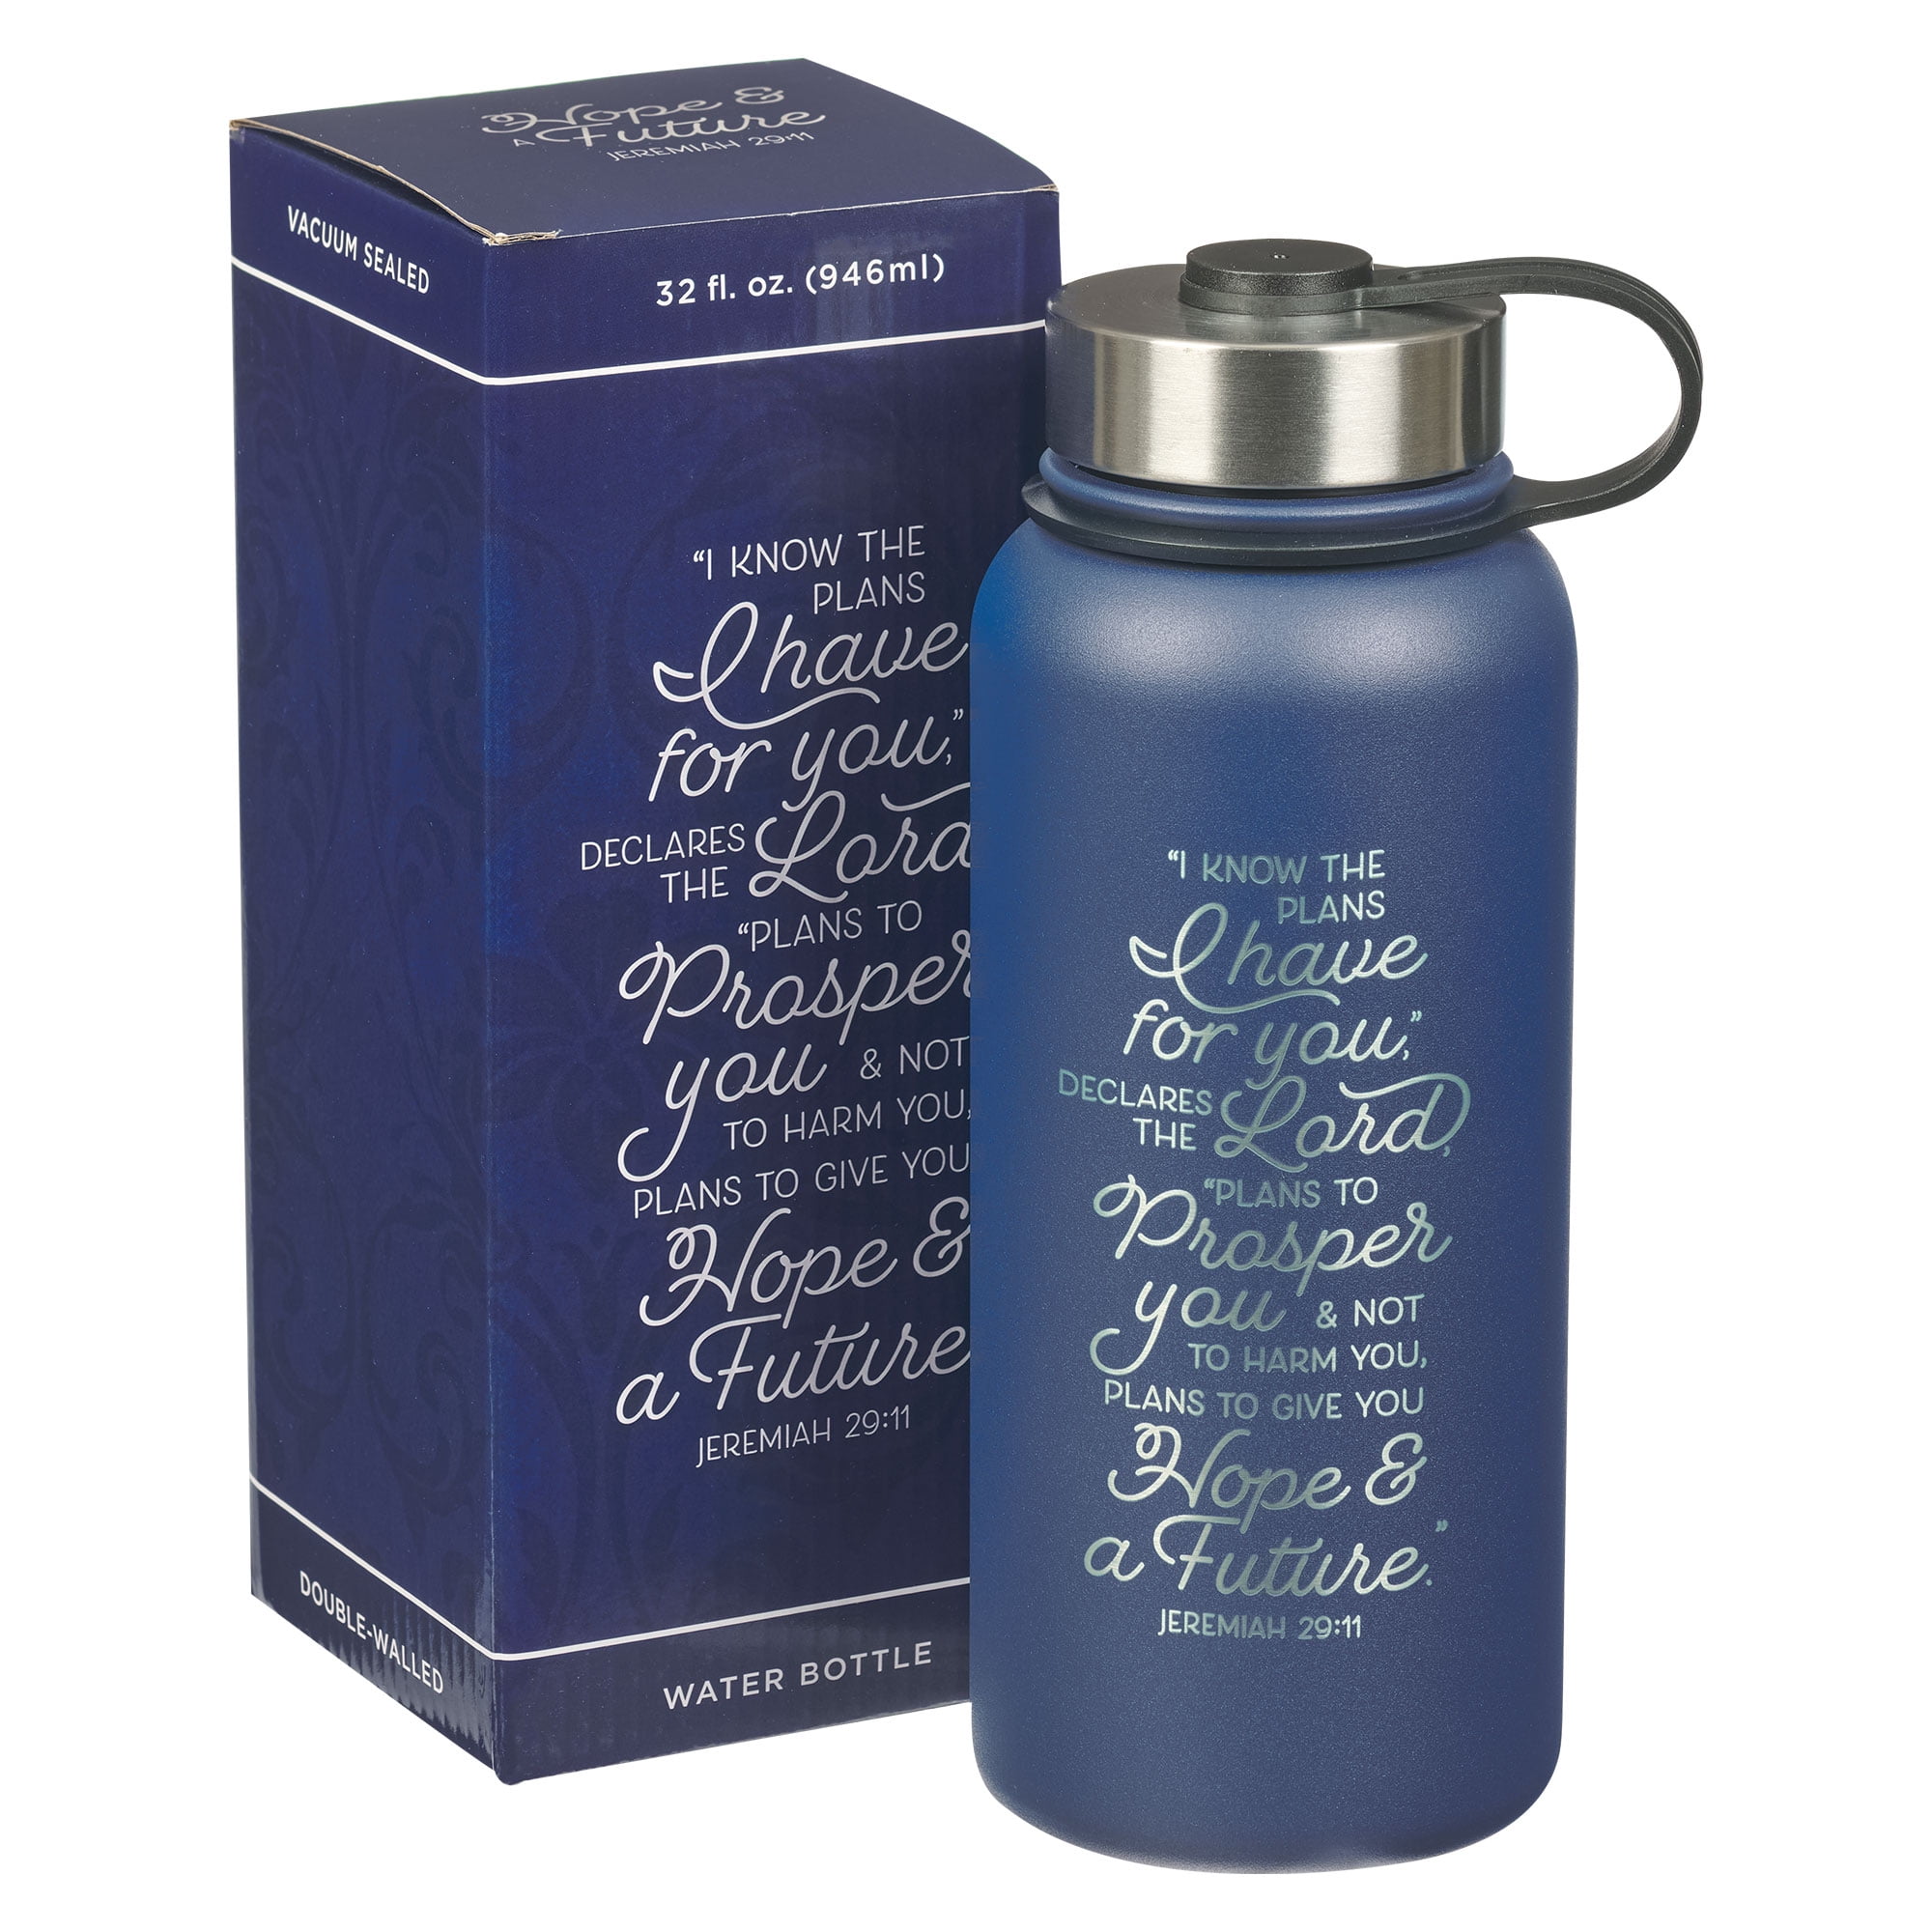 The Best Insulated Water Bottles for The Man on The Go - Men's Journal